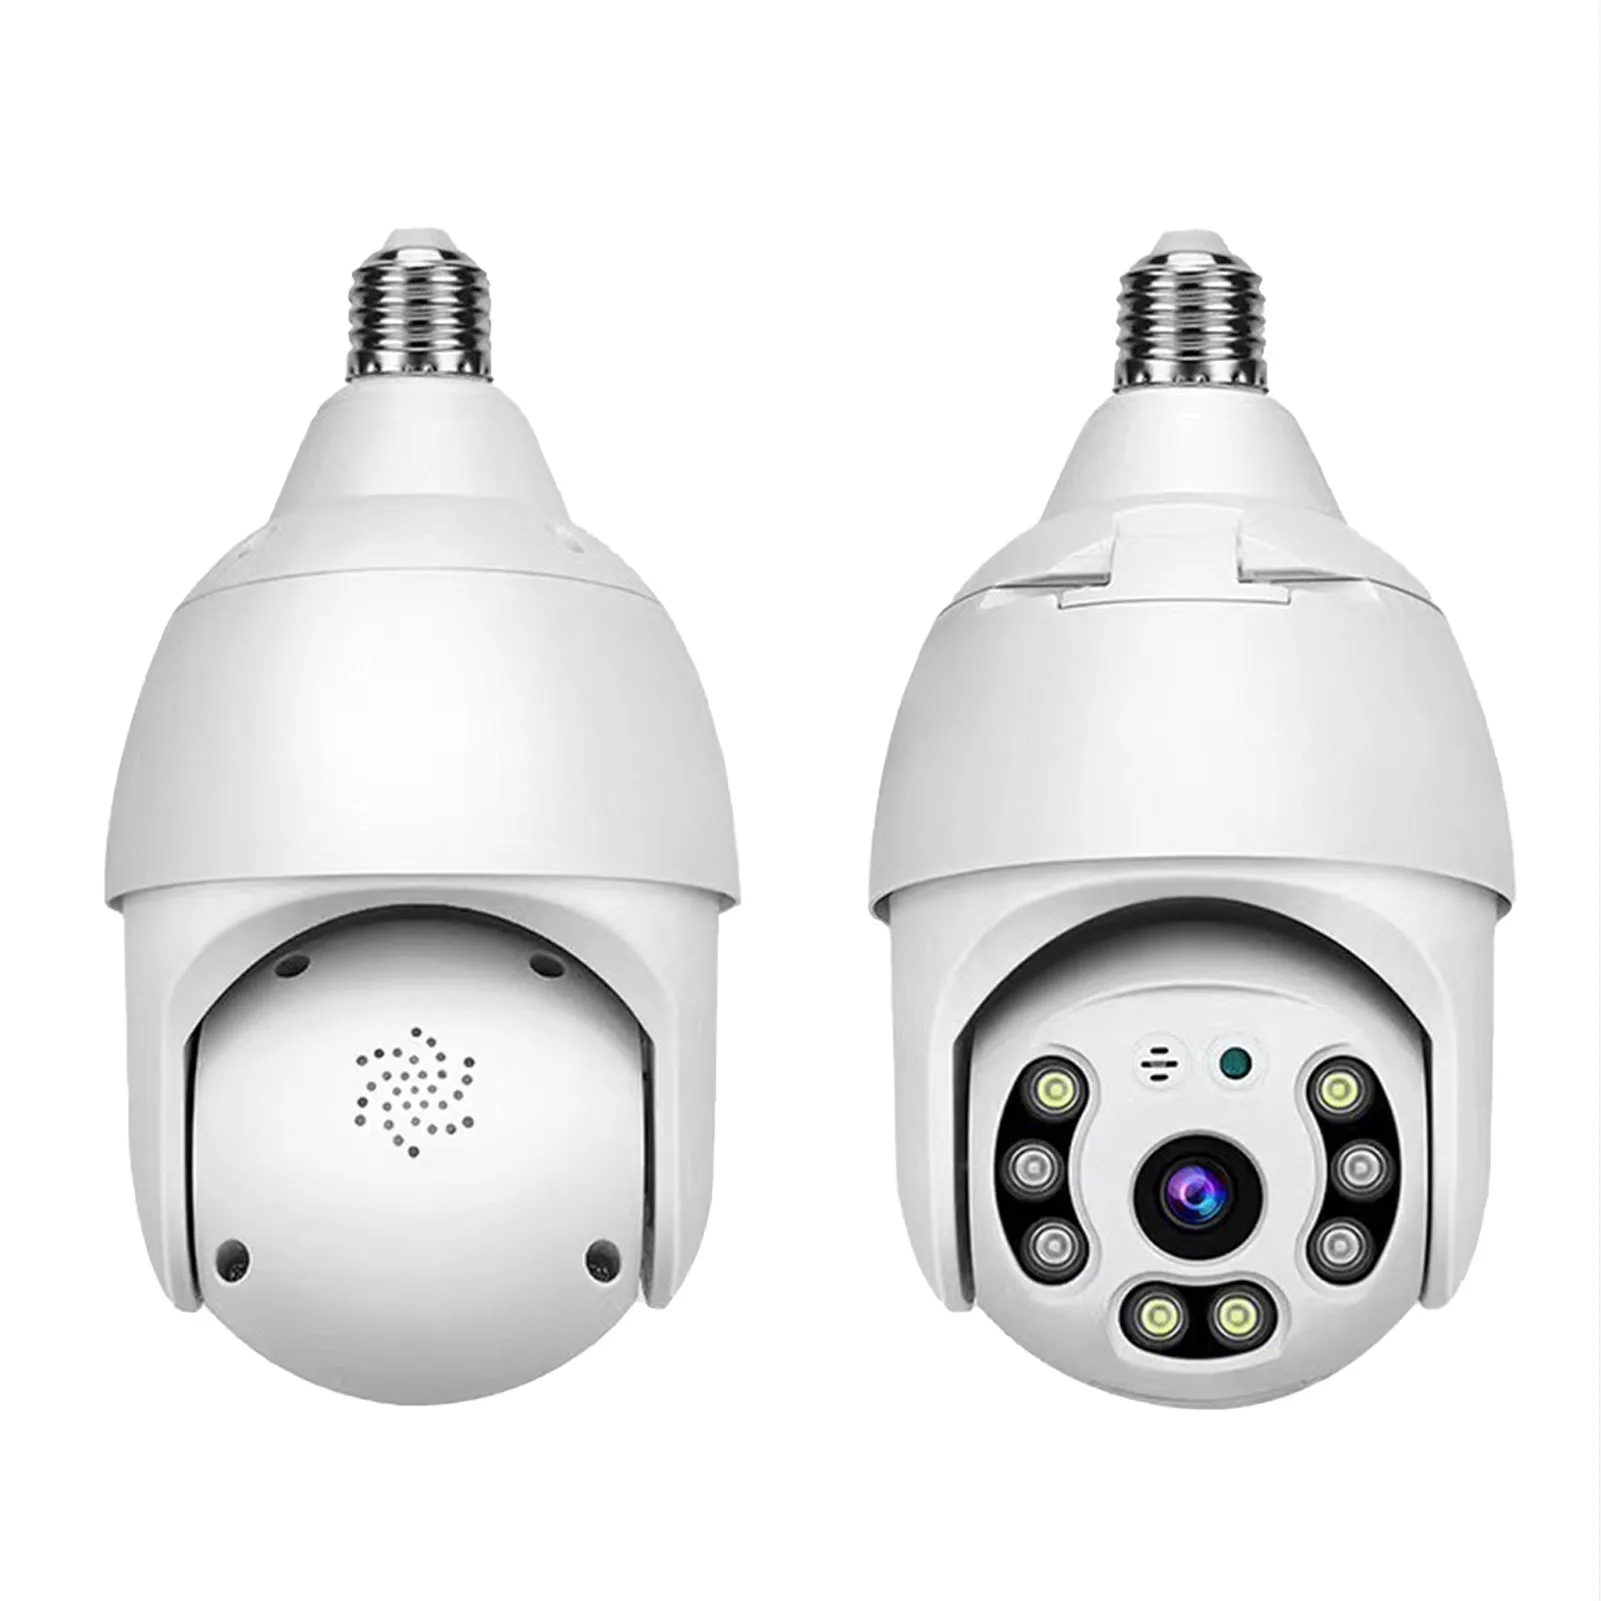 E27 Light Bulb Security Camera Motion Detection & Night Vision Surveillance Camcorder Housewarming Gifts